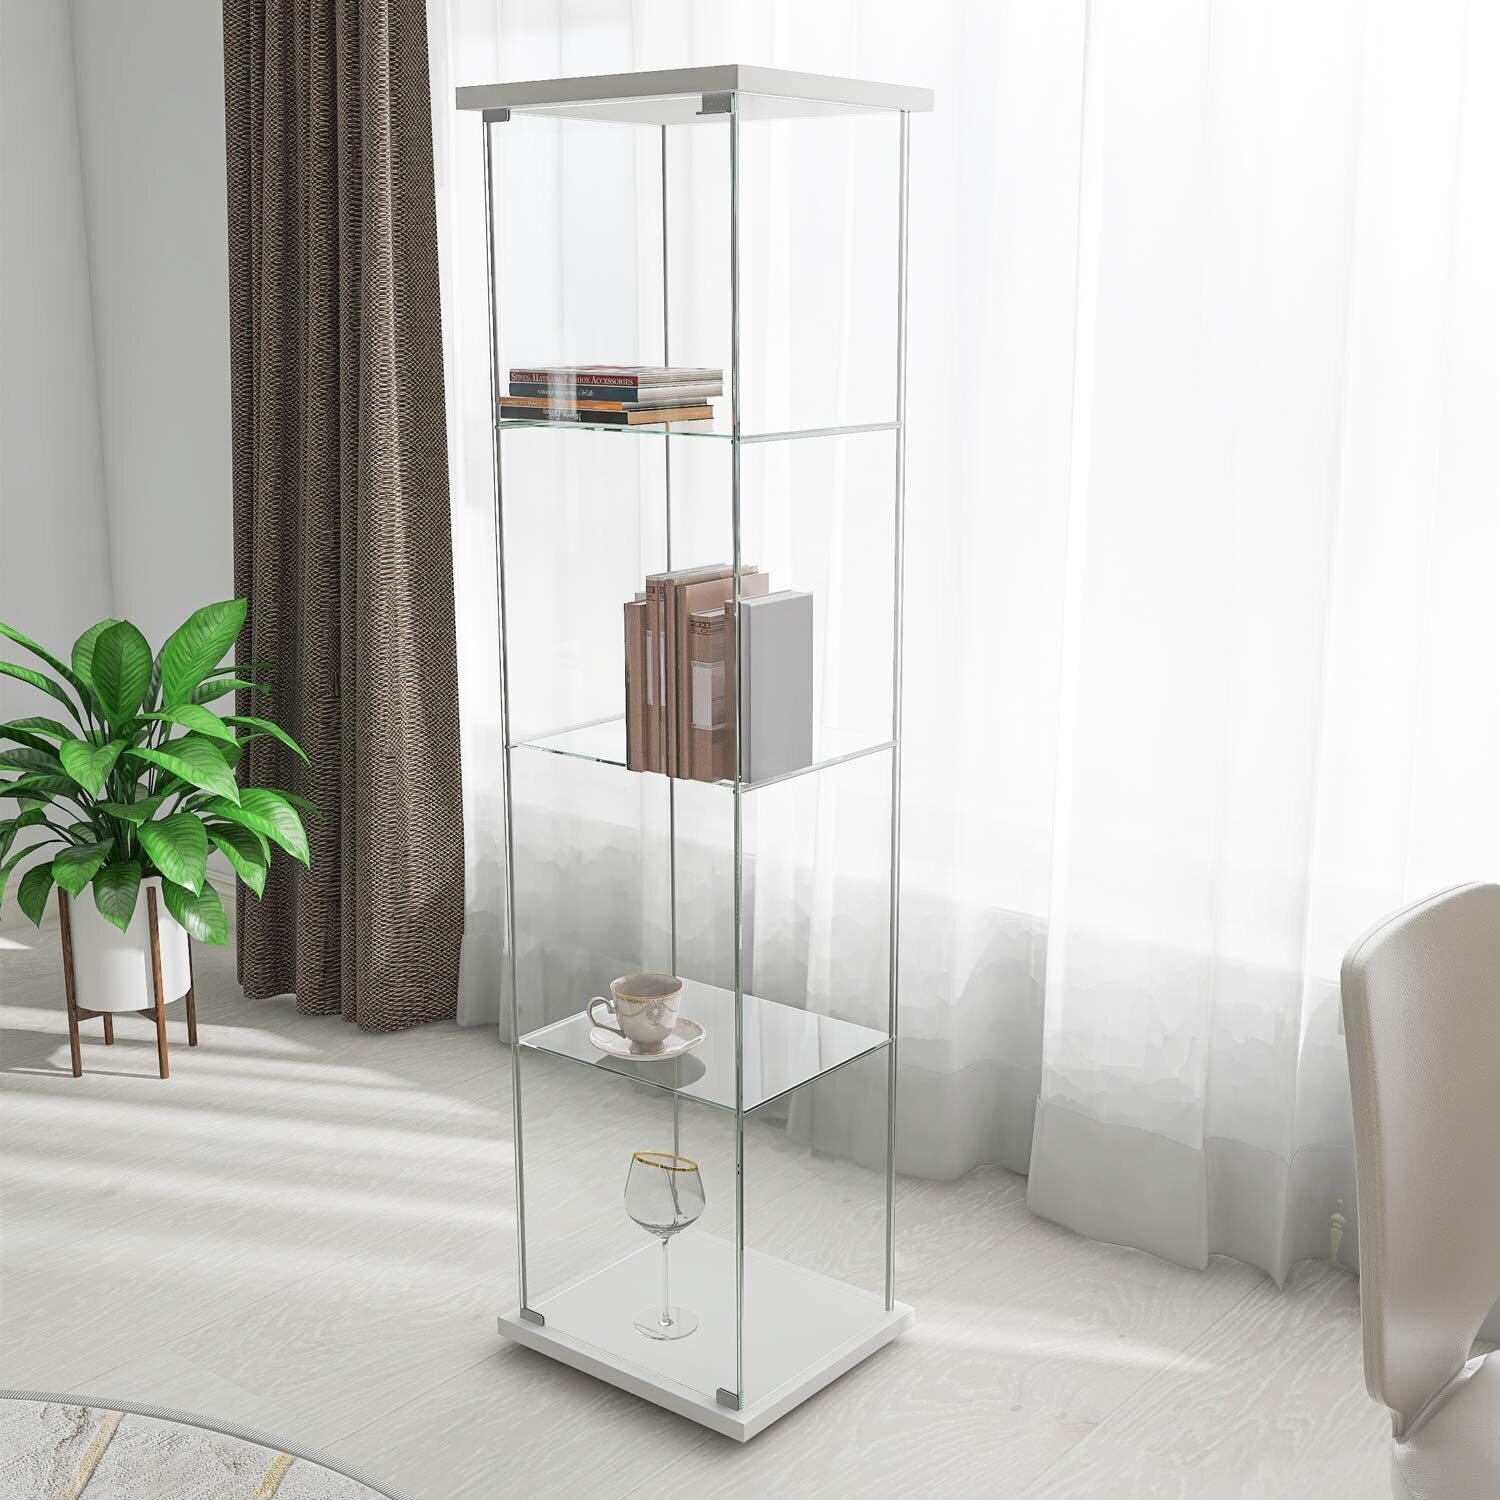 Tall, slim bookcase with glass doors